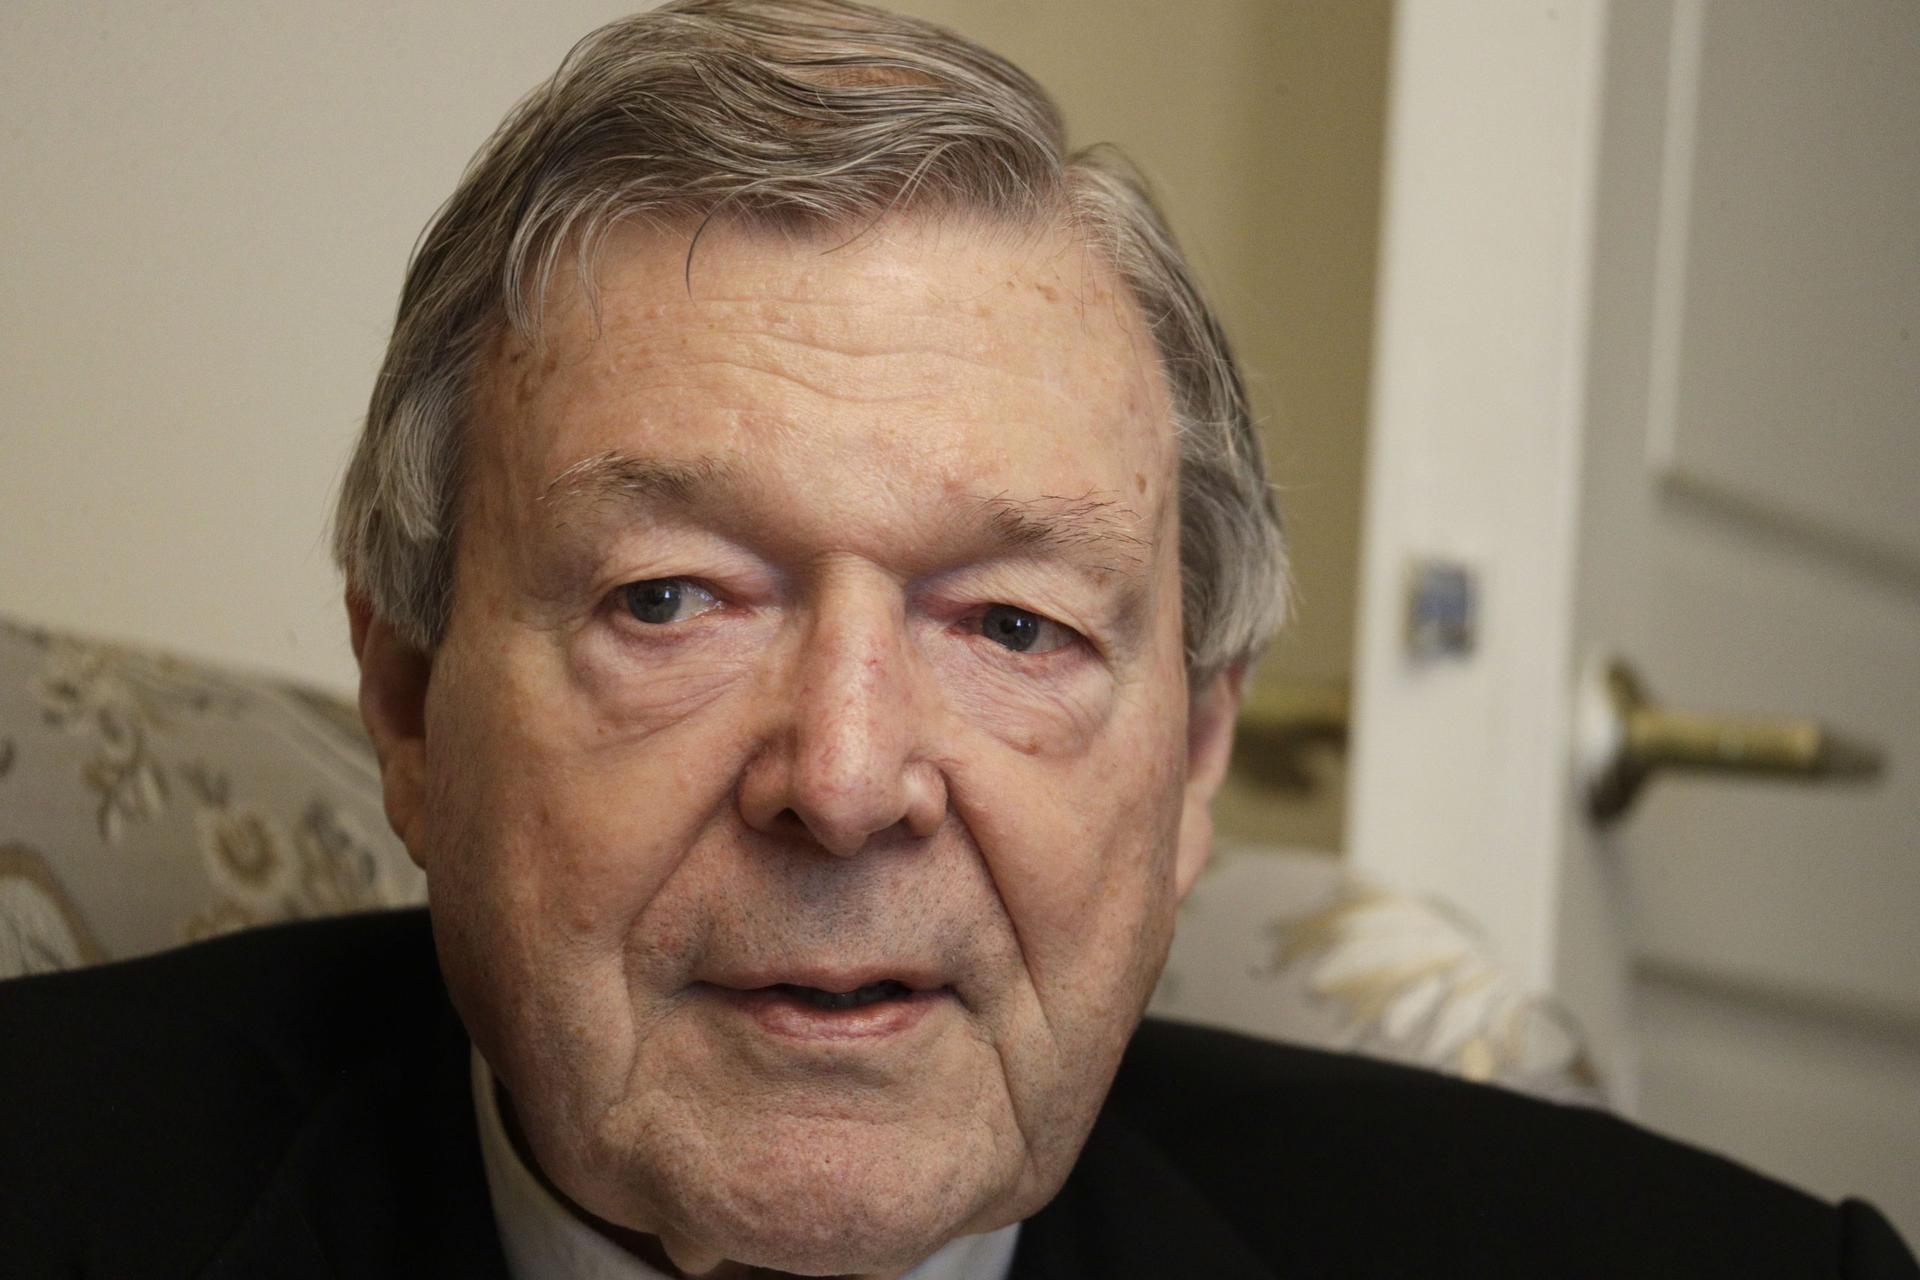 Cardinal Pell calls for Vatican reprimand over sexuality remarks